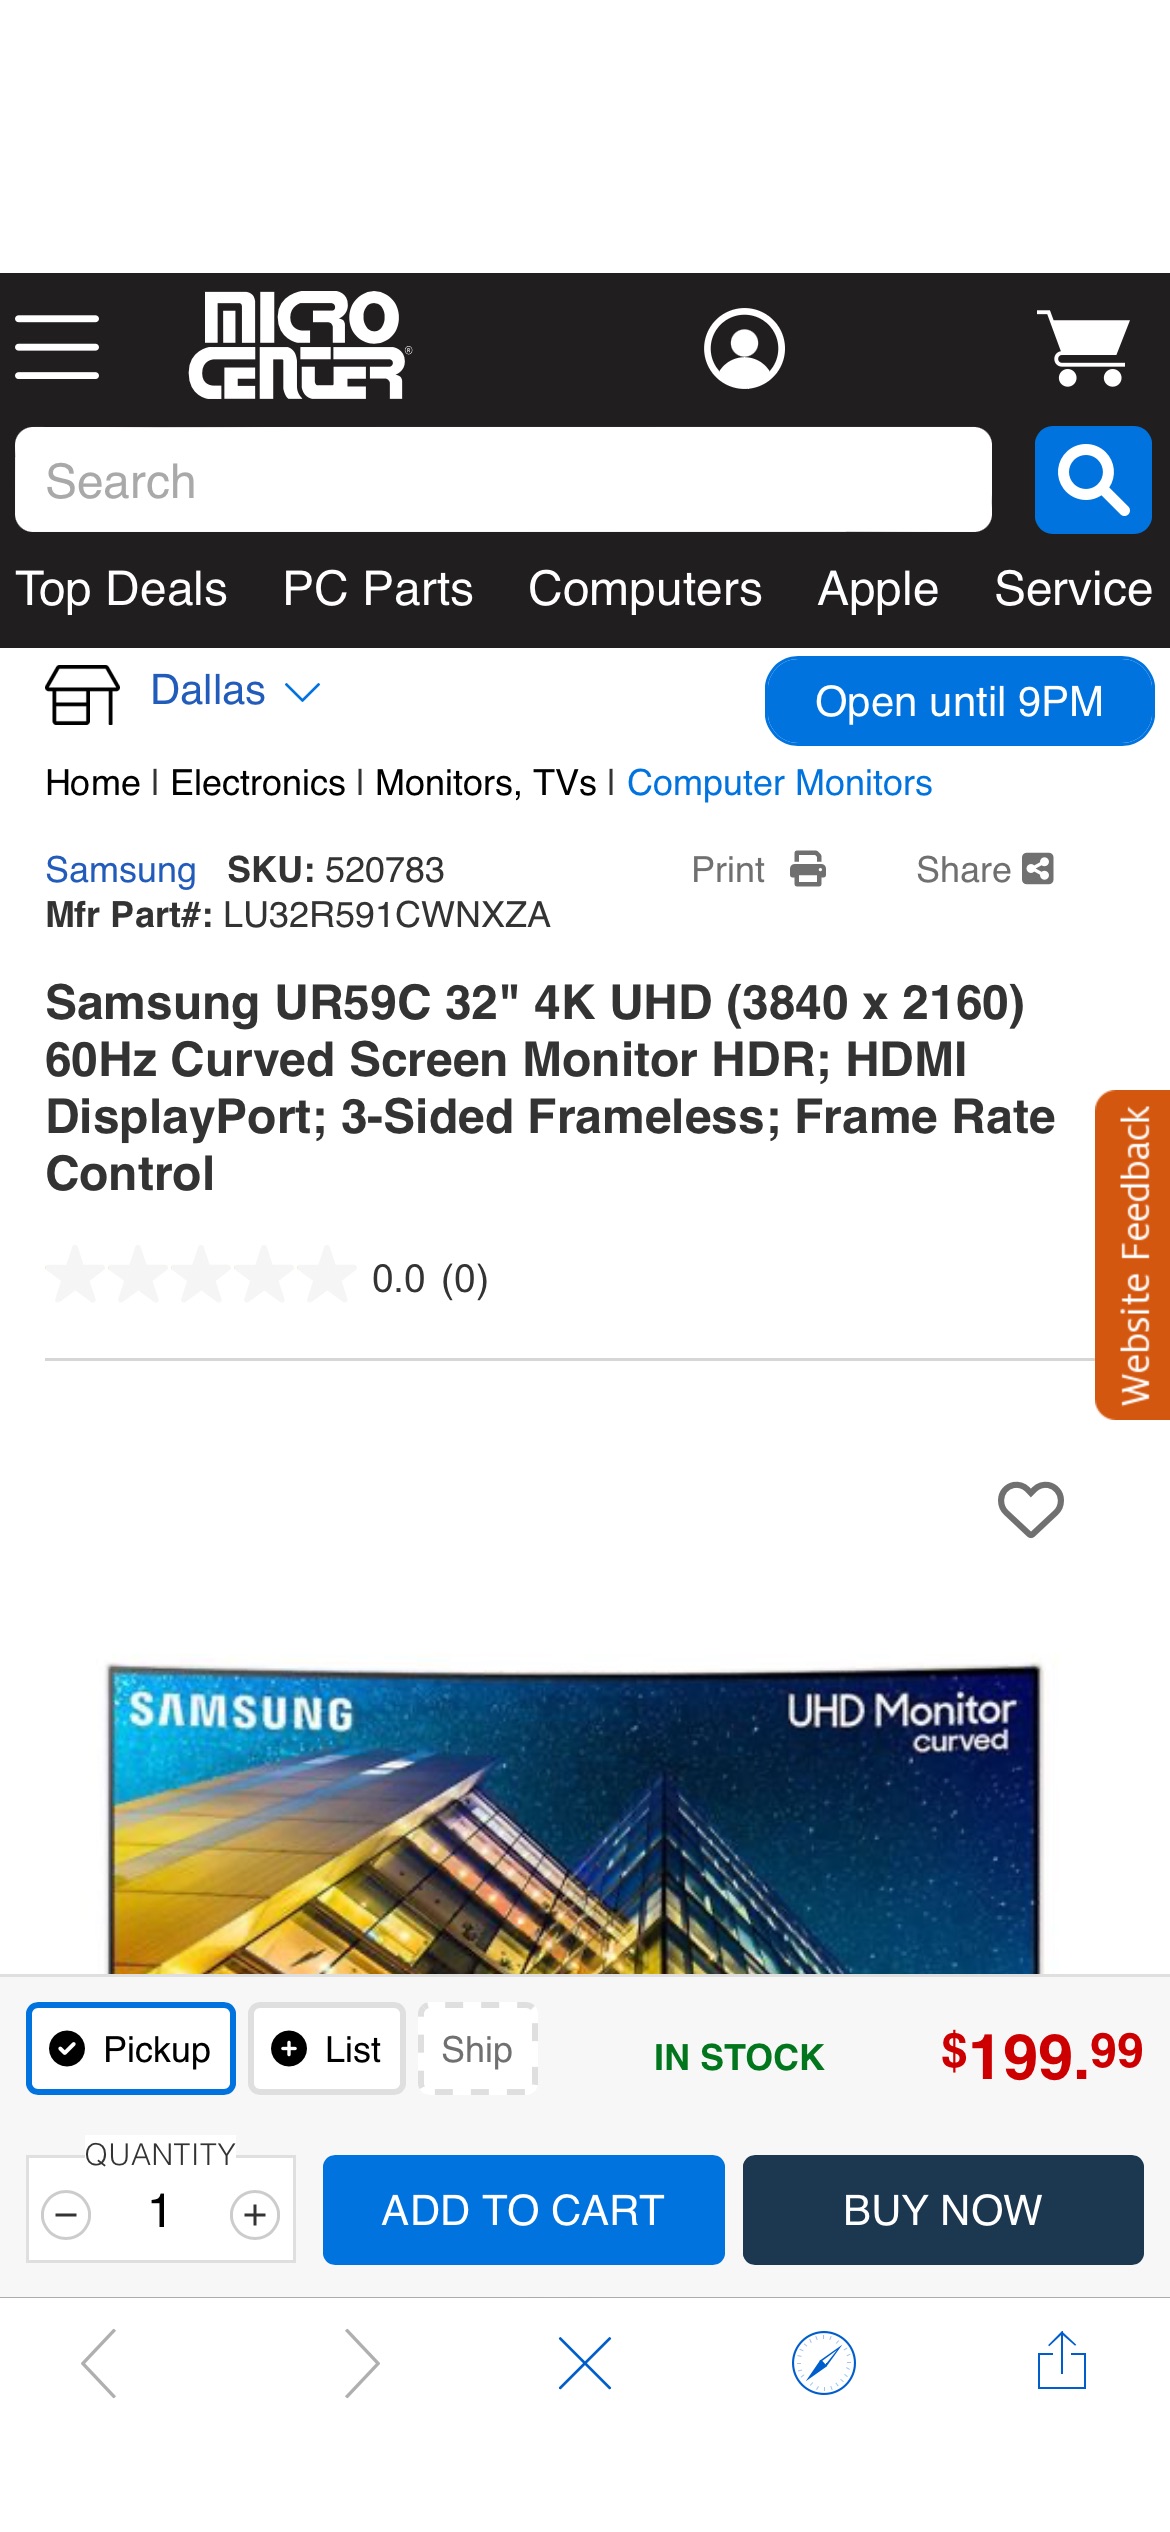 Samsung UR59C 32" 4K UHD (3840 x 2160) 60Hz Curved Screen Monitor; HDR; HDMI DisplayPort; 3-Sided Frameless; Frame Rate - Micro Center